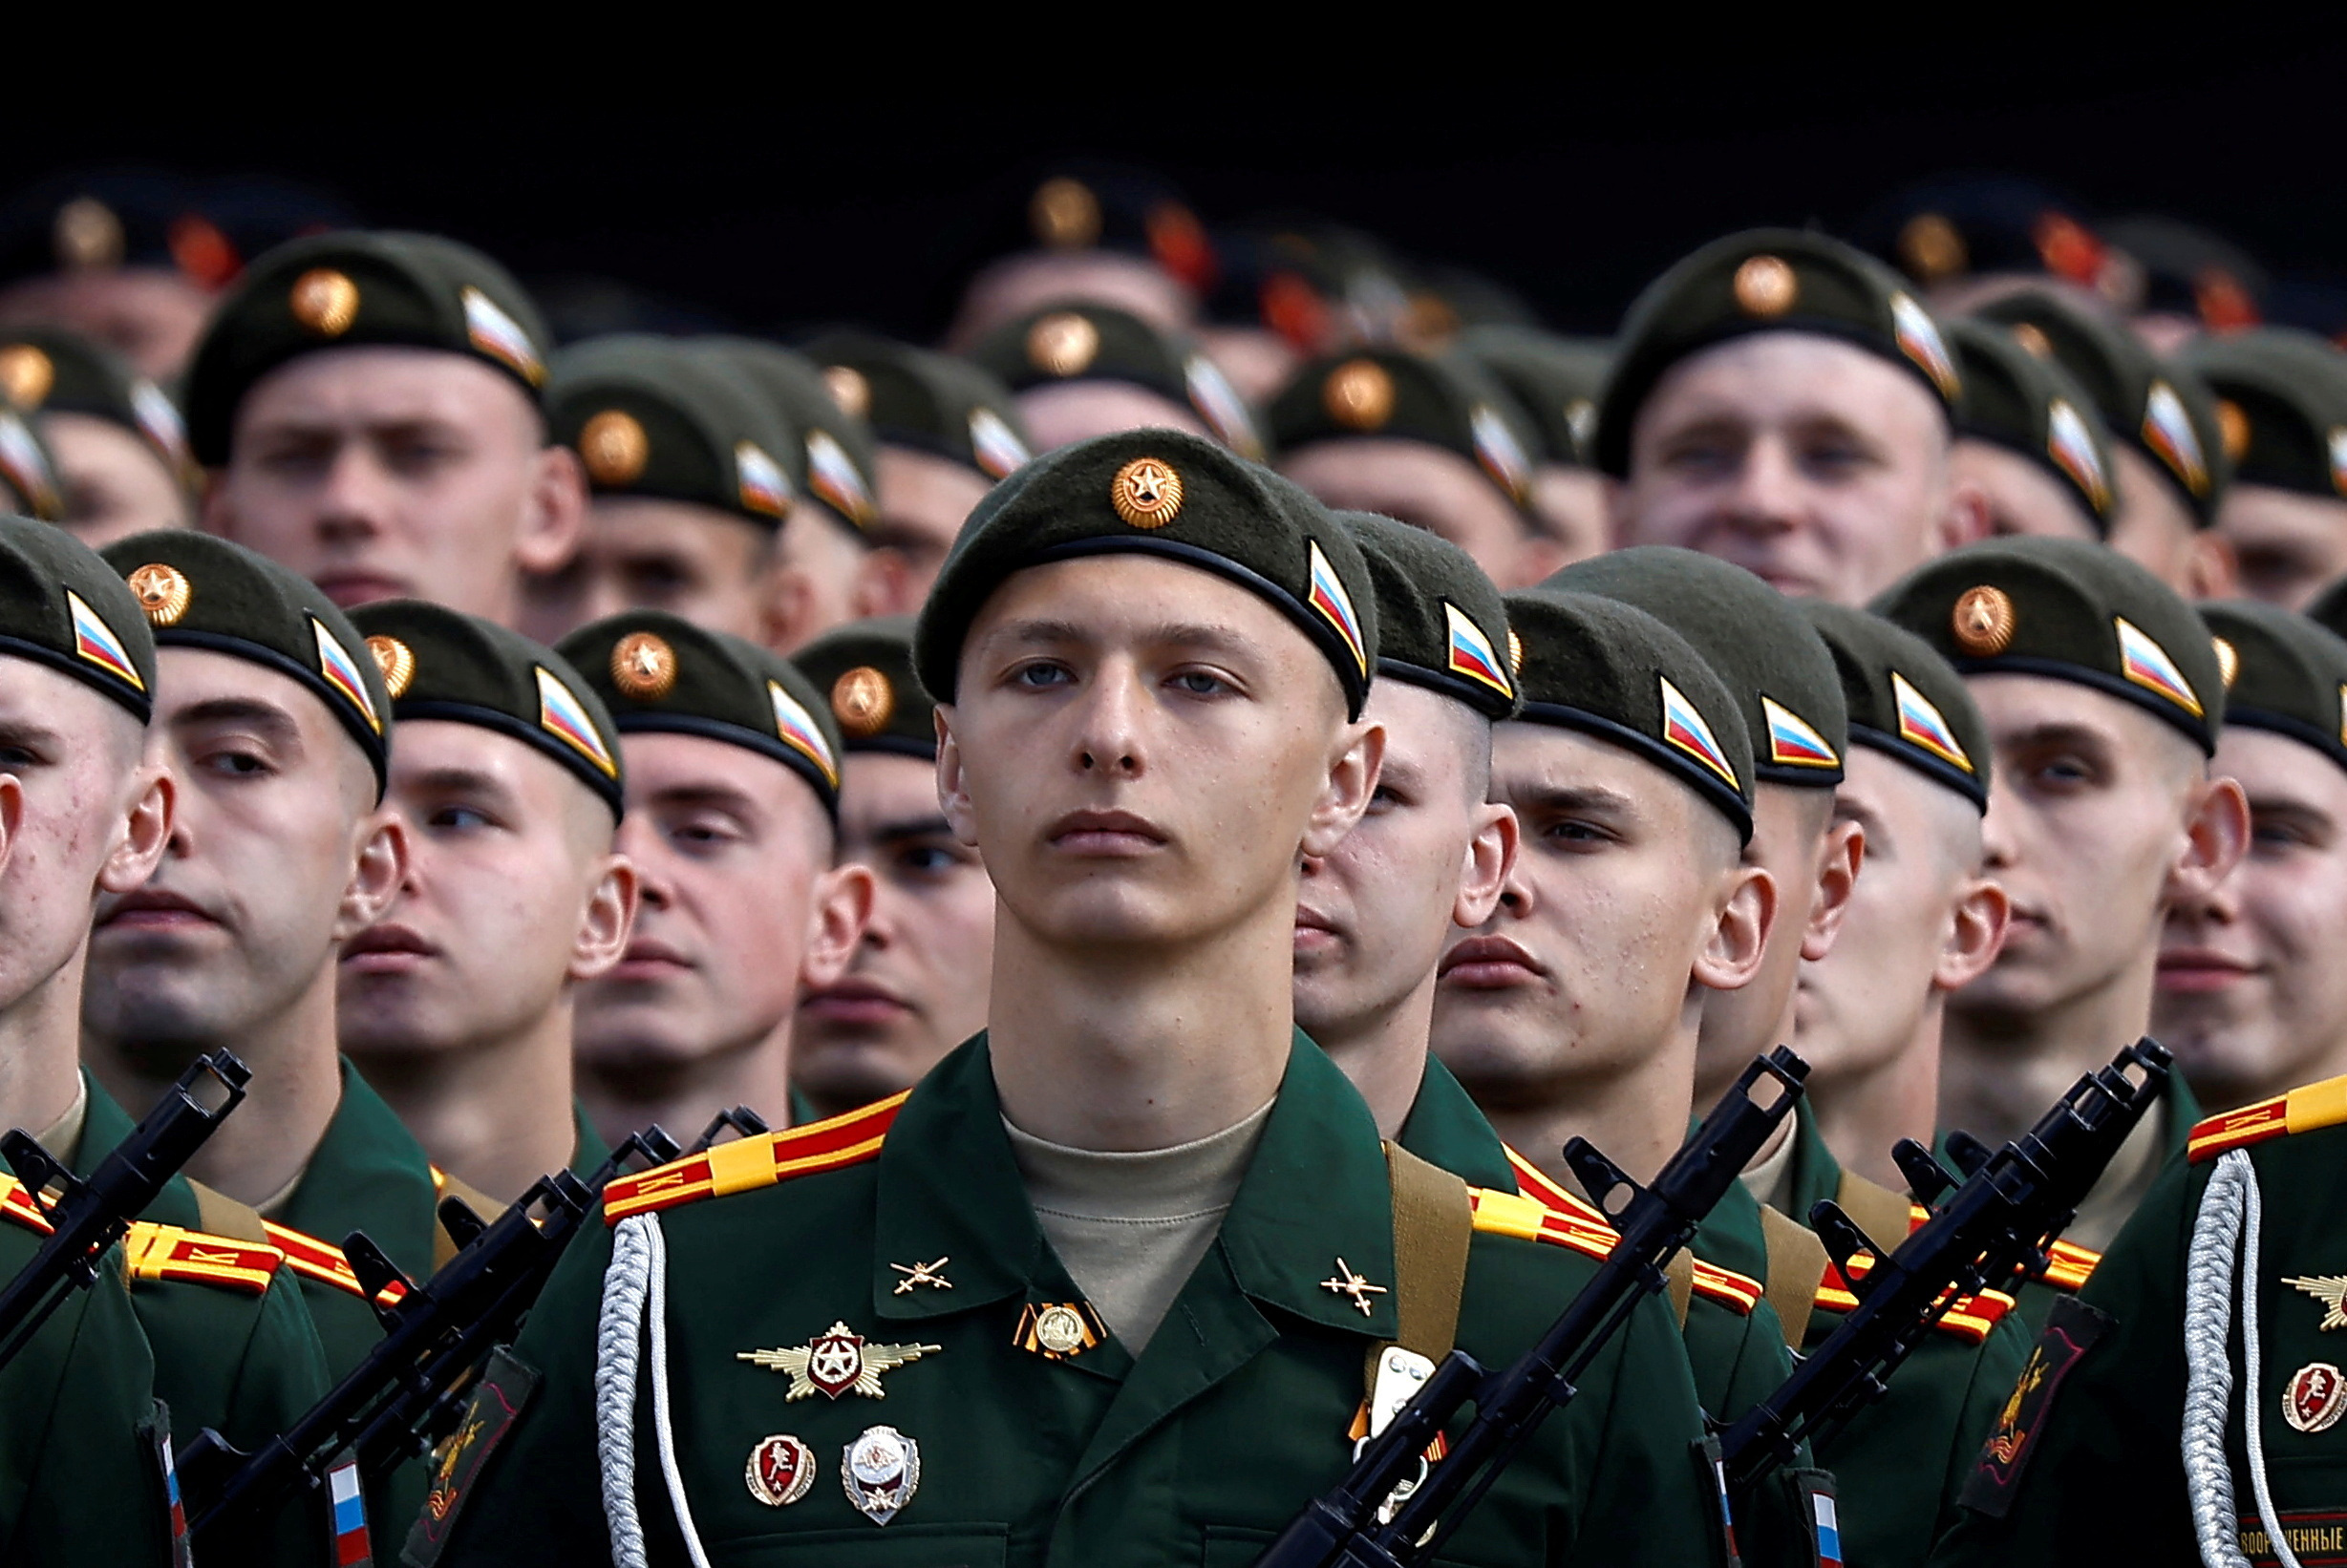 Russia increases maximum size of armed forces by 170,000 servicemen ...